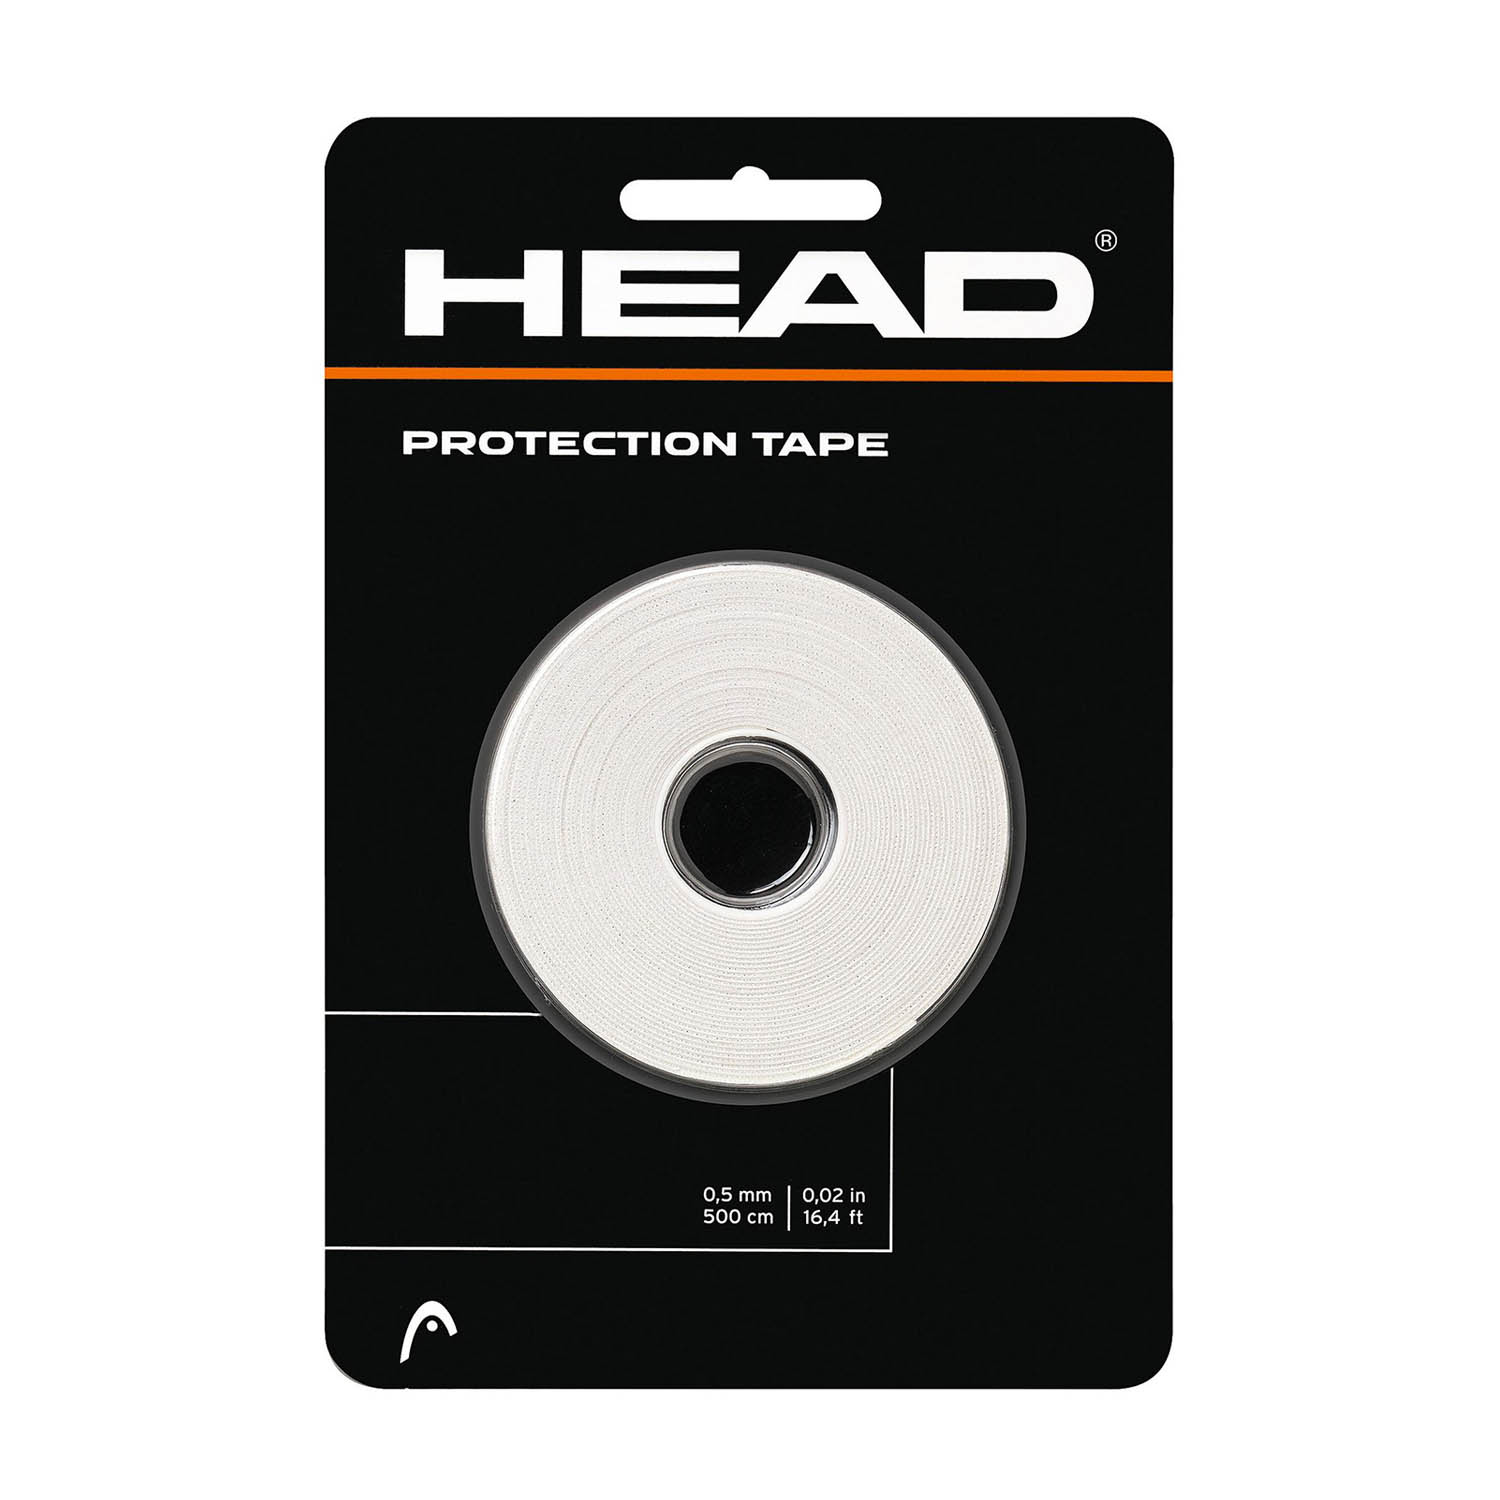 Head Protection 5 m Tape - White